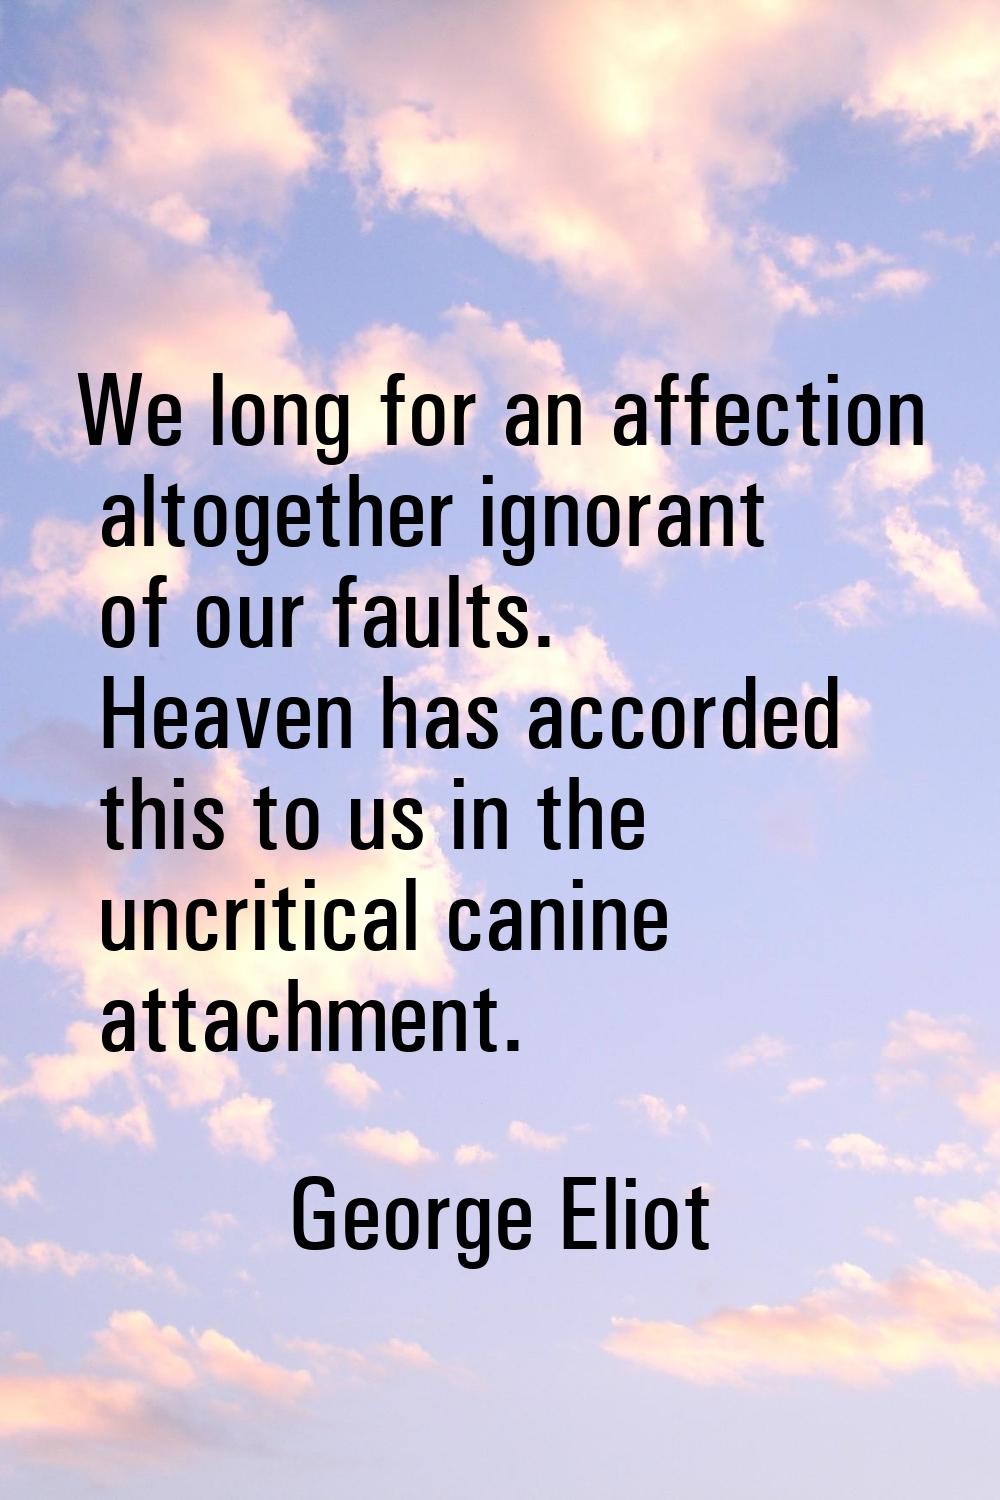 We long for an affection altogether ignorant of our faults. Heaven has accorded this to us in the u